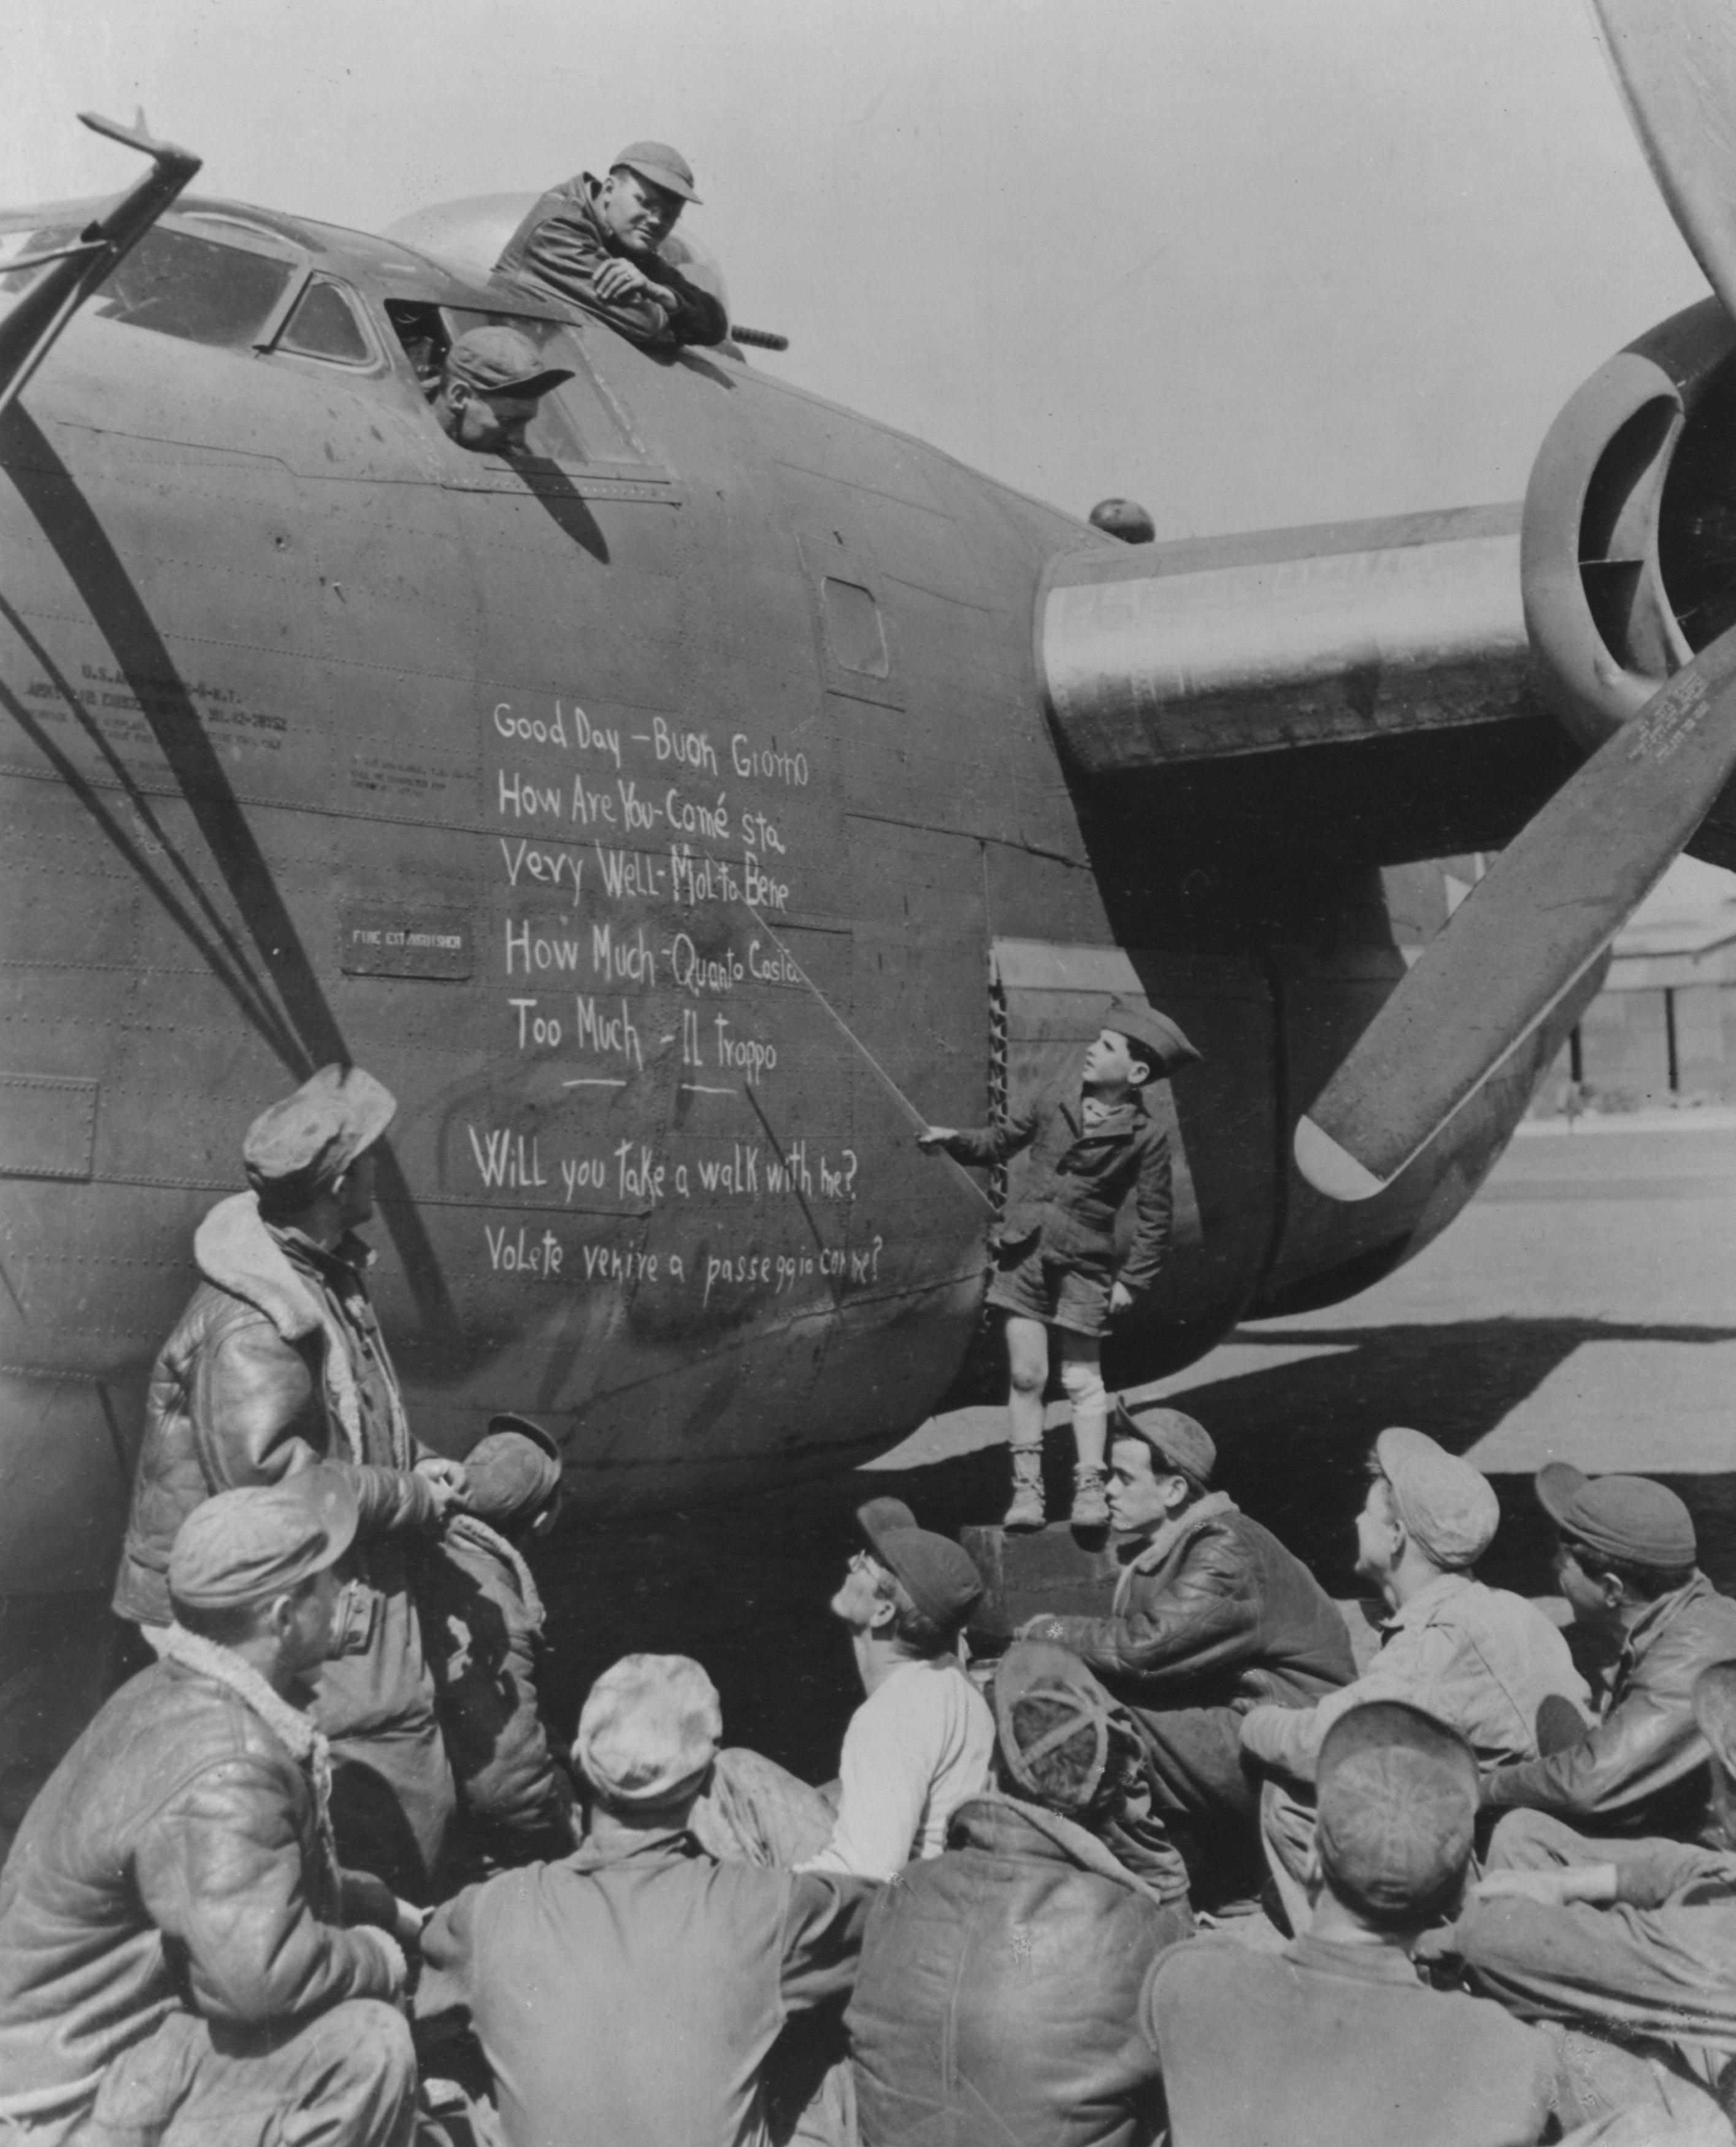 USAAF airmen learning the local language from a young teacher using the side of a B-24 bomber as a blackboard in Southern Italy in 1944.jpeg